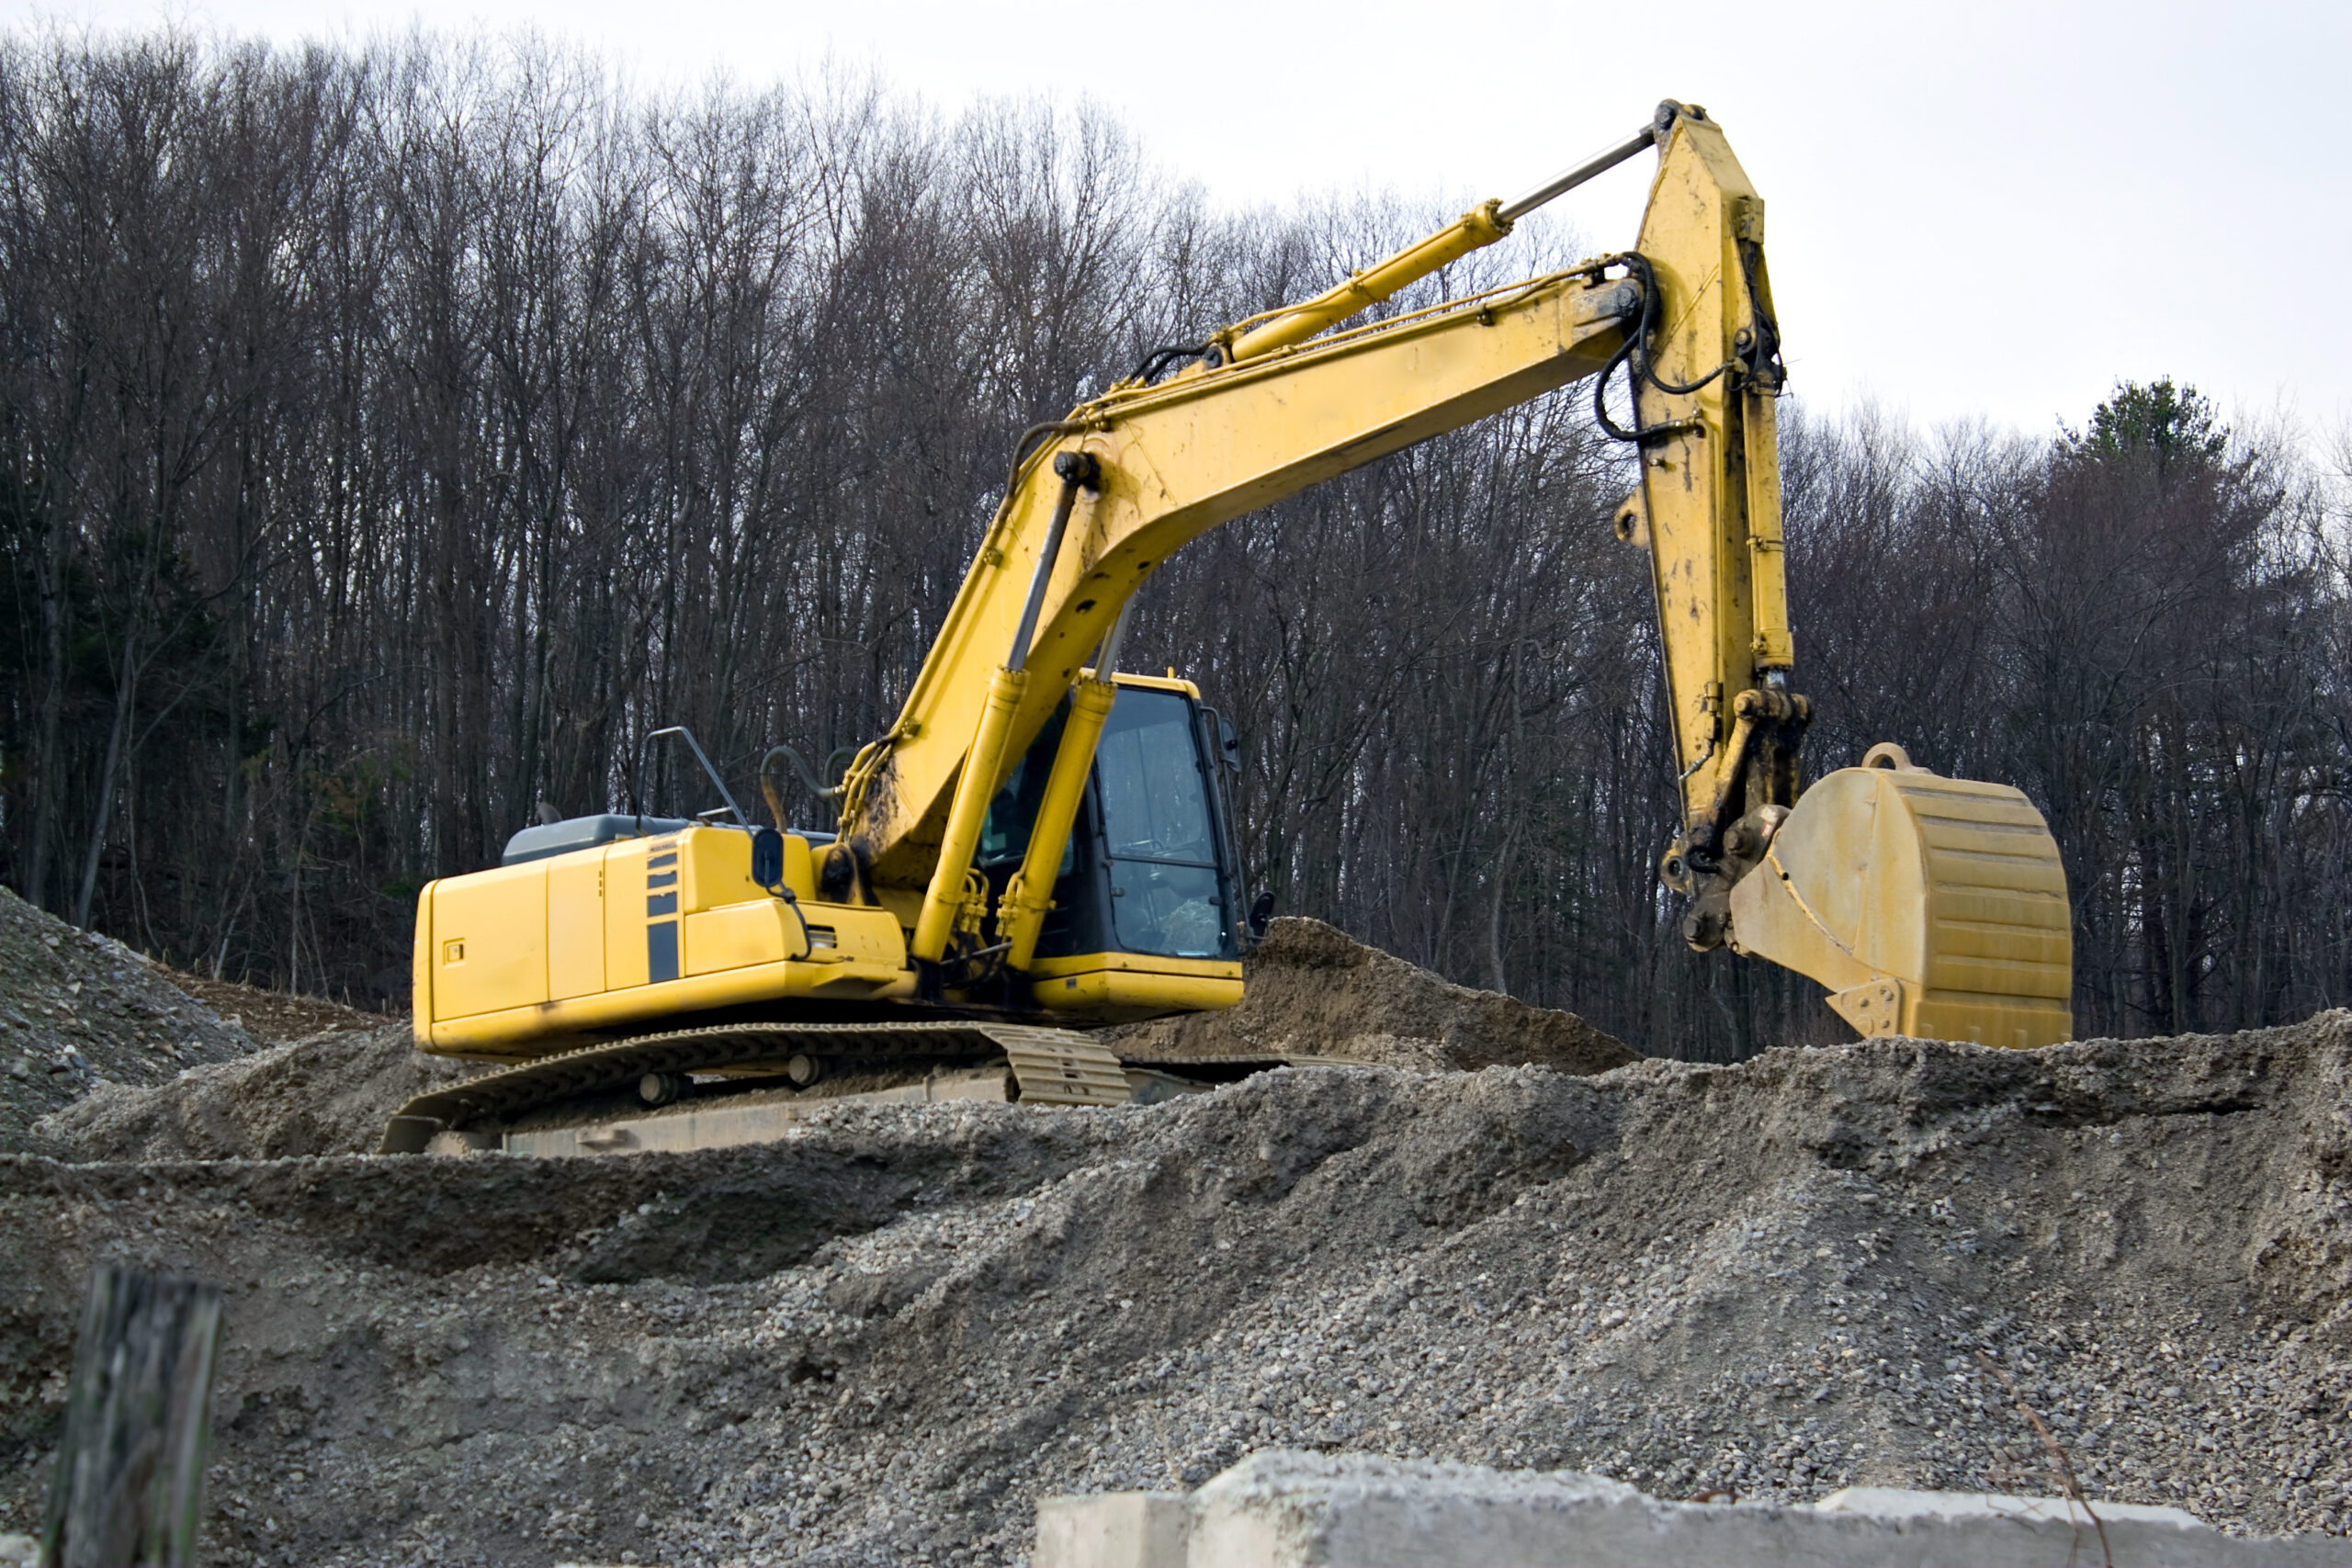 view of a construction site with heavy duty equipment StNl7EuArj scaled